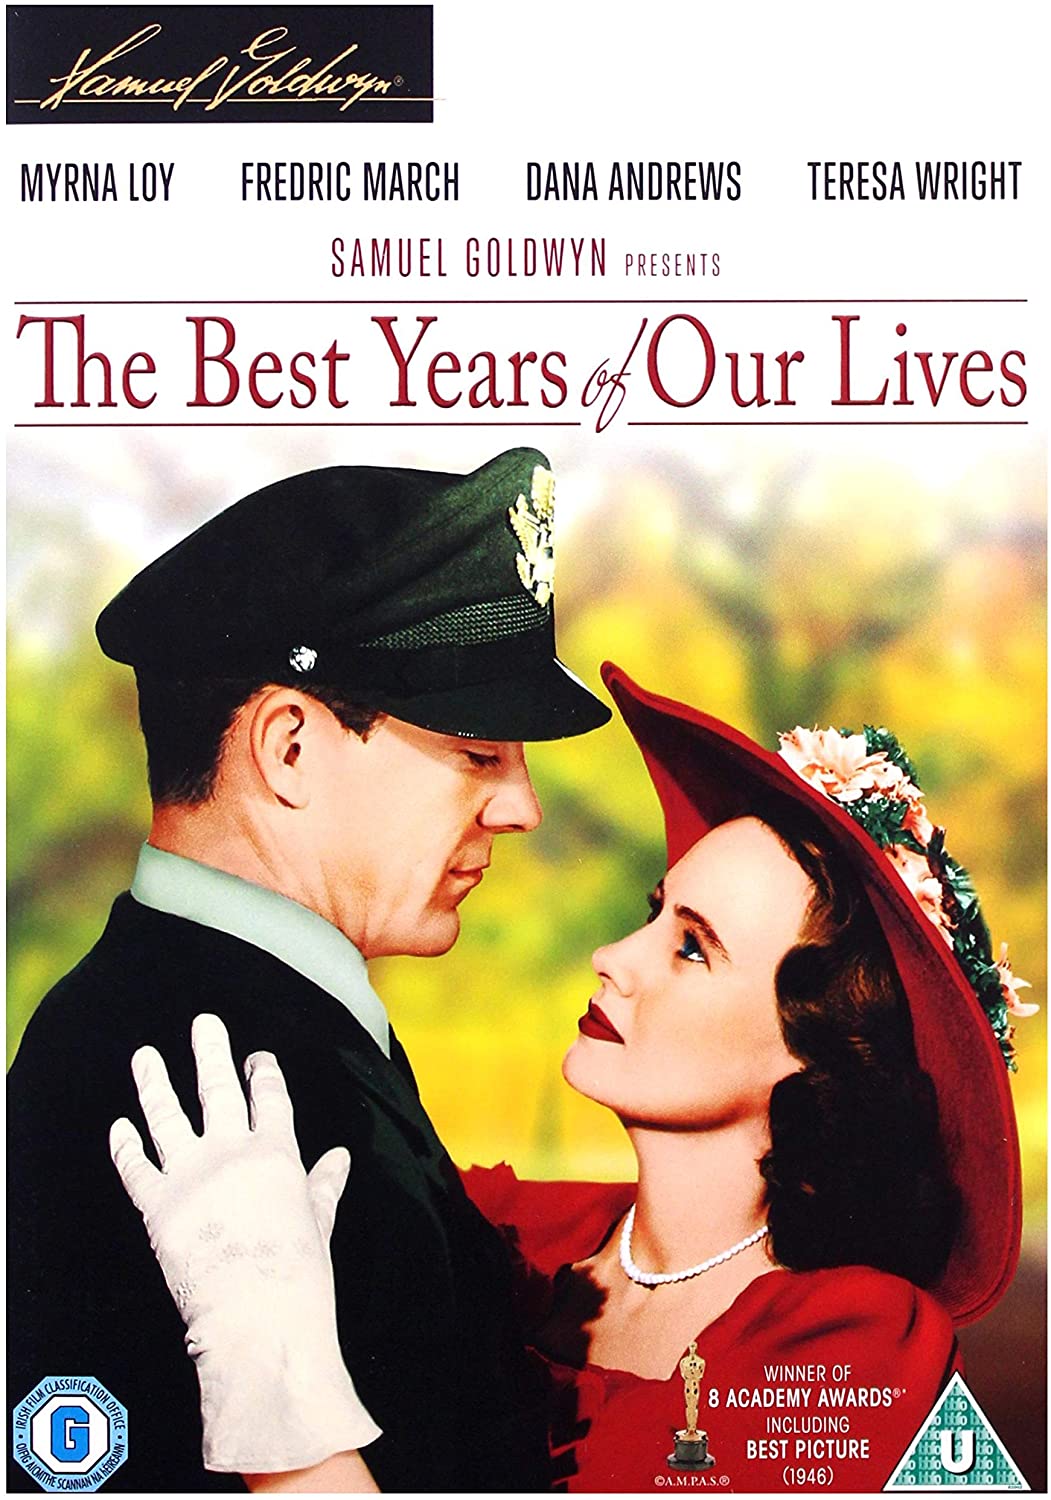 The Best Years Of Our Lives - Samuel Goldwyn Presents [1946]  - Drama/War [DVD]